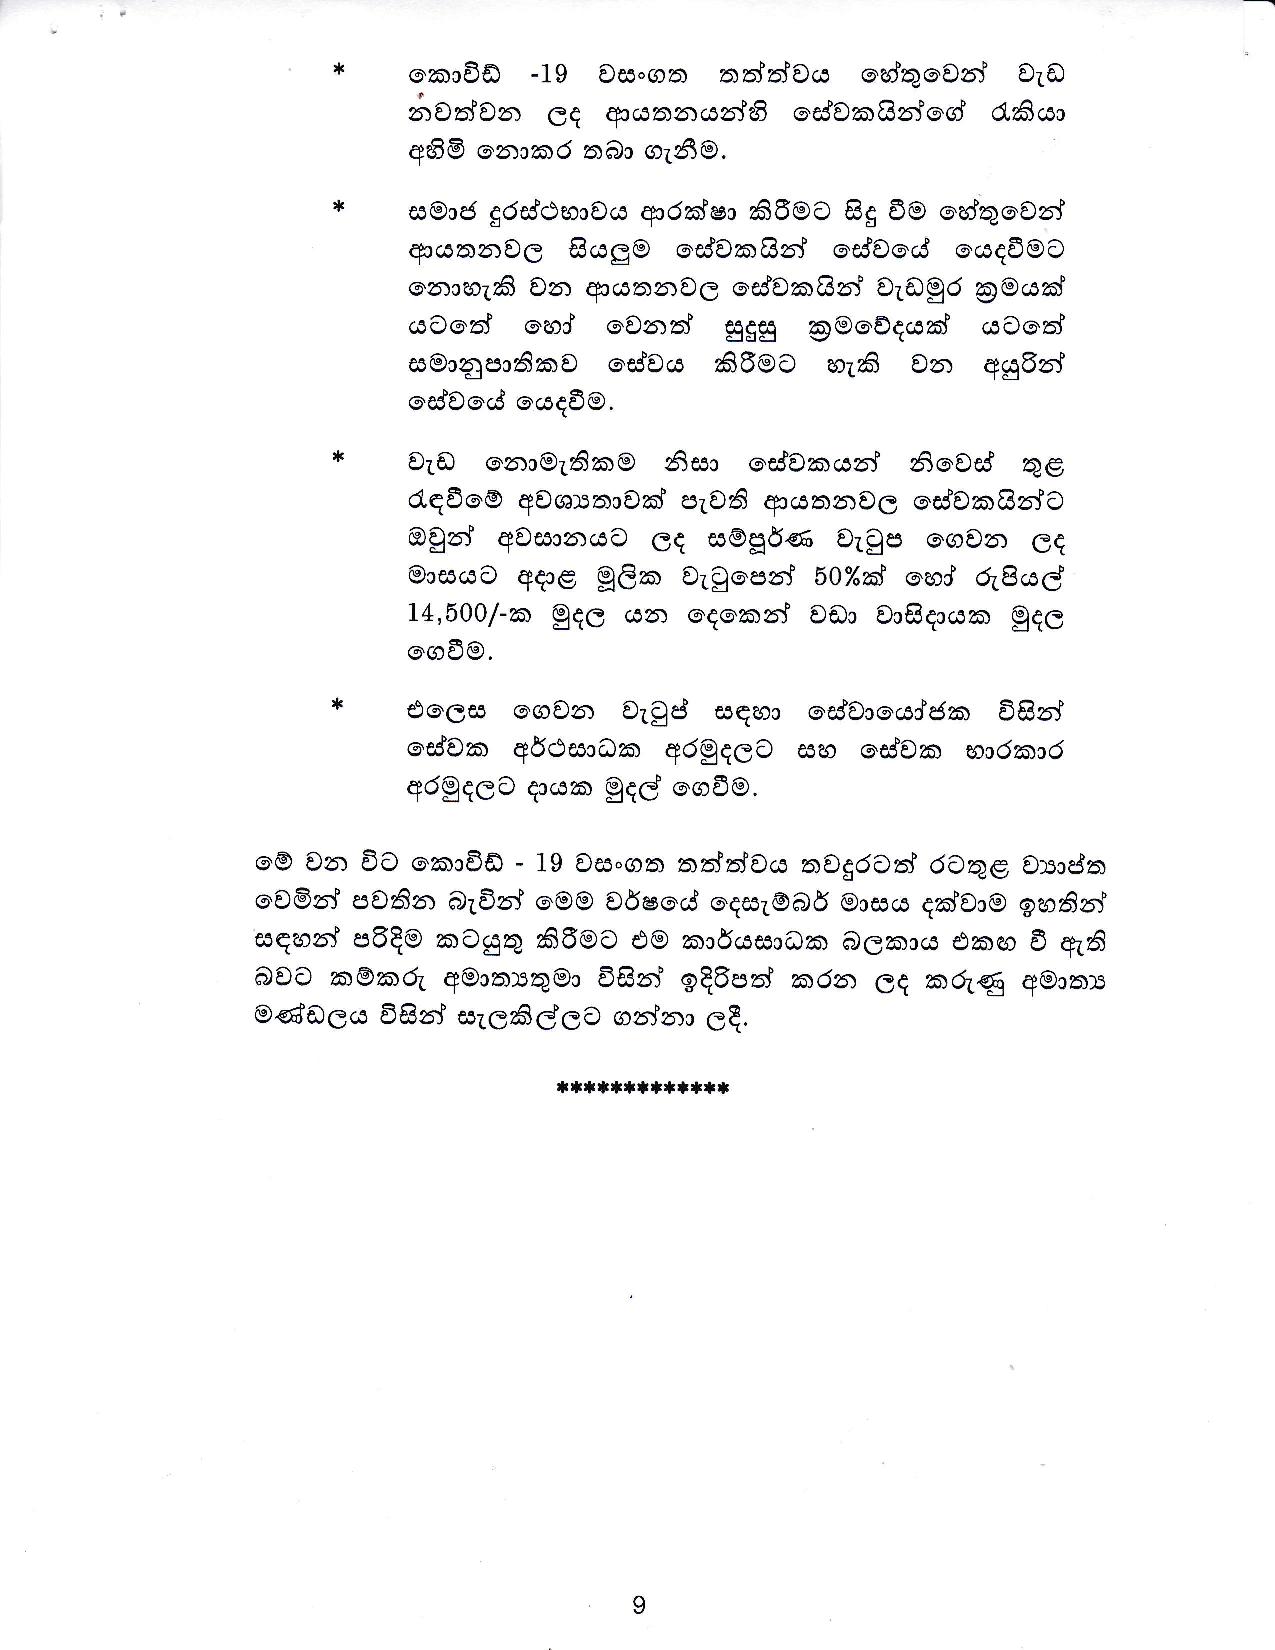 Cabinet Decision on 26.10.2020 page 009